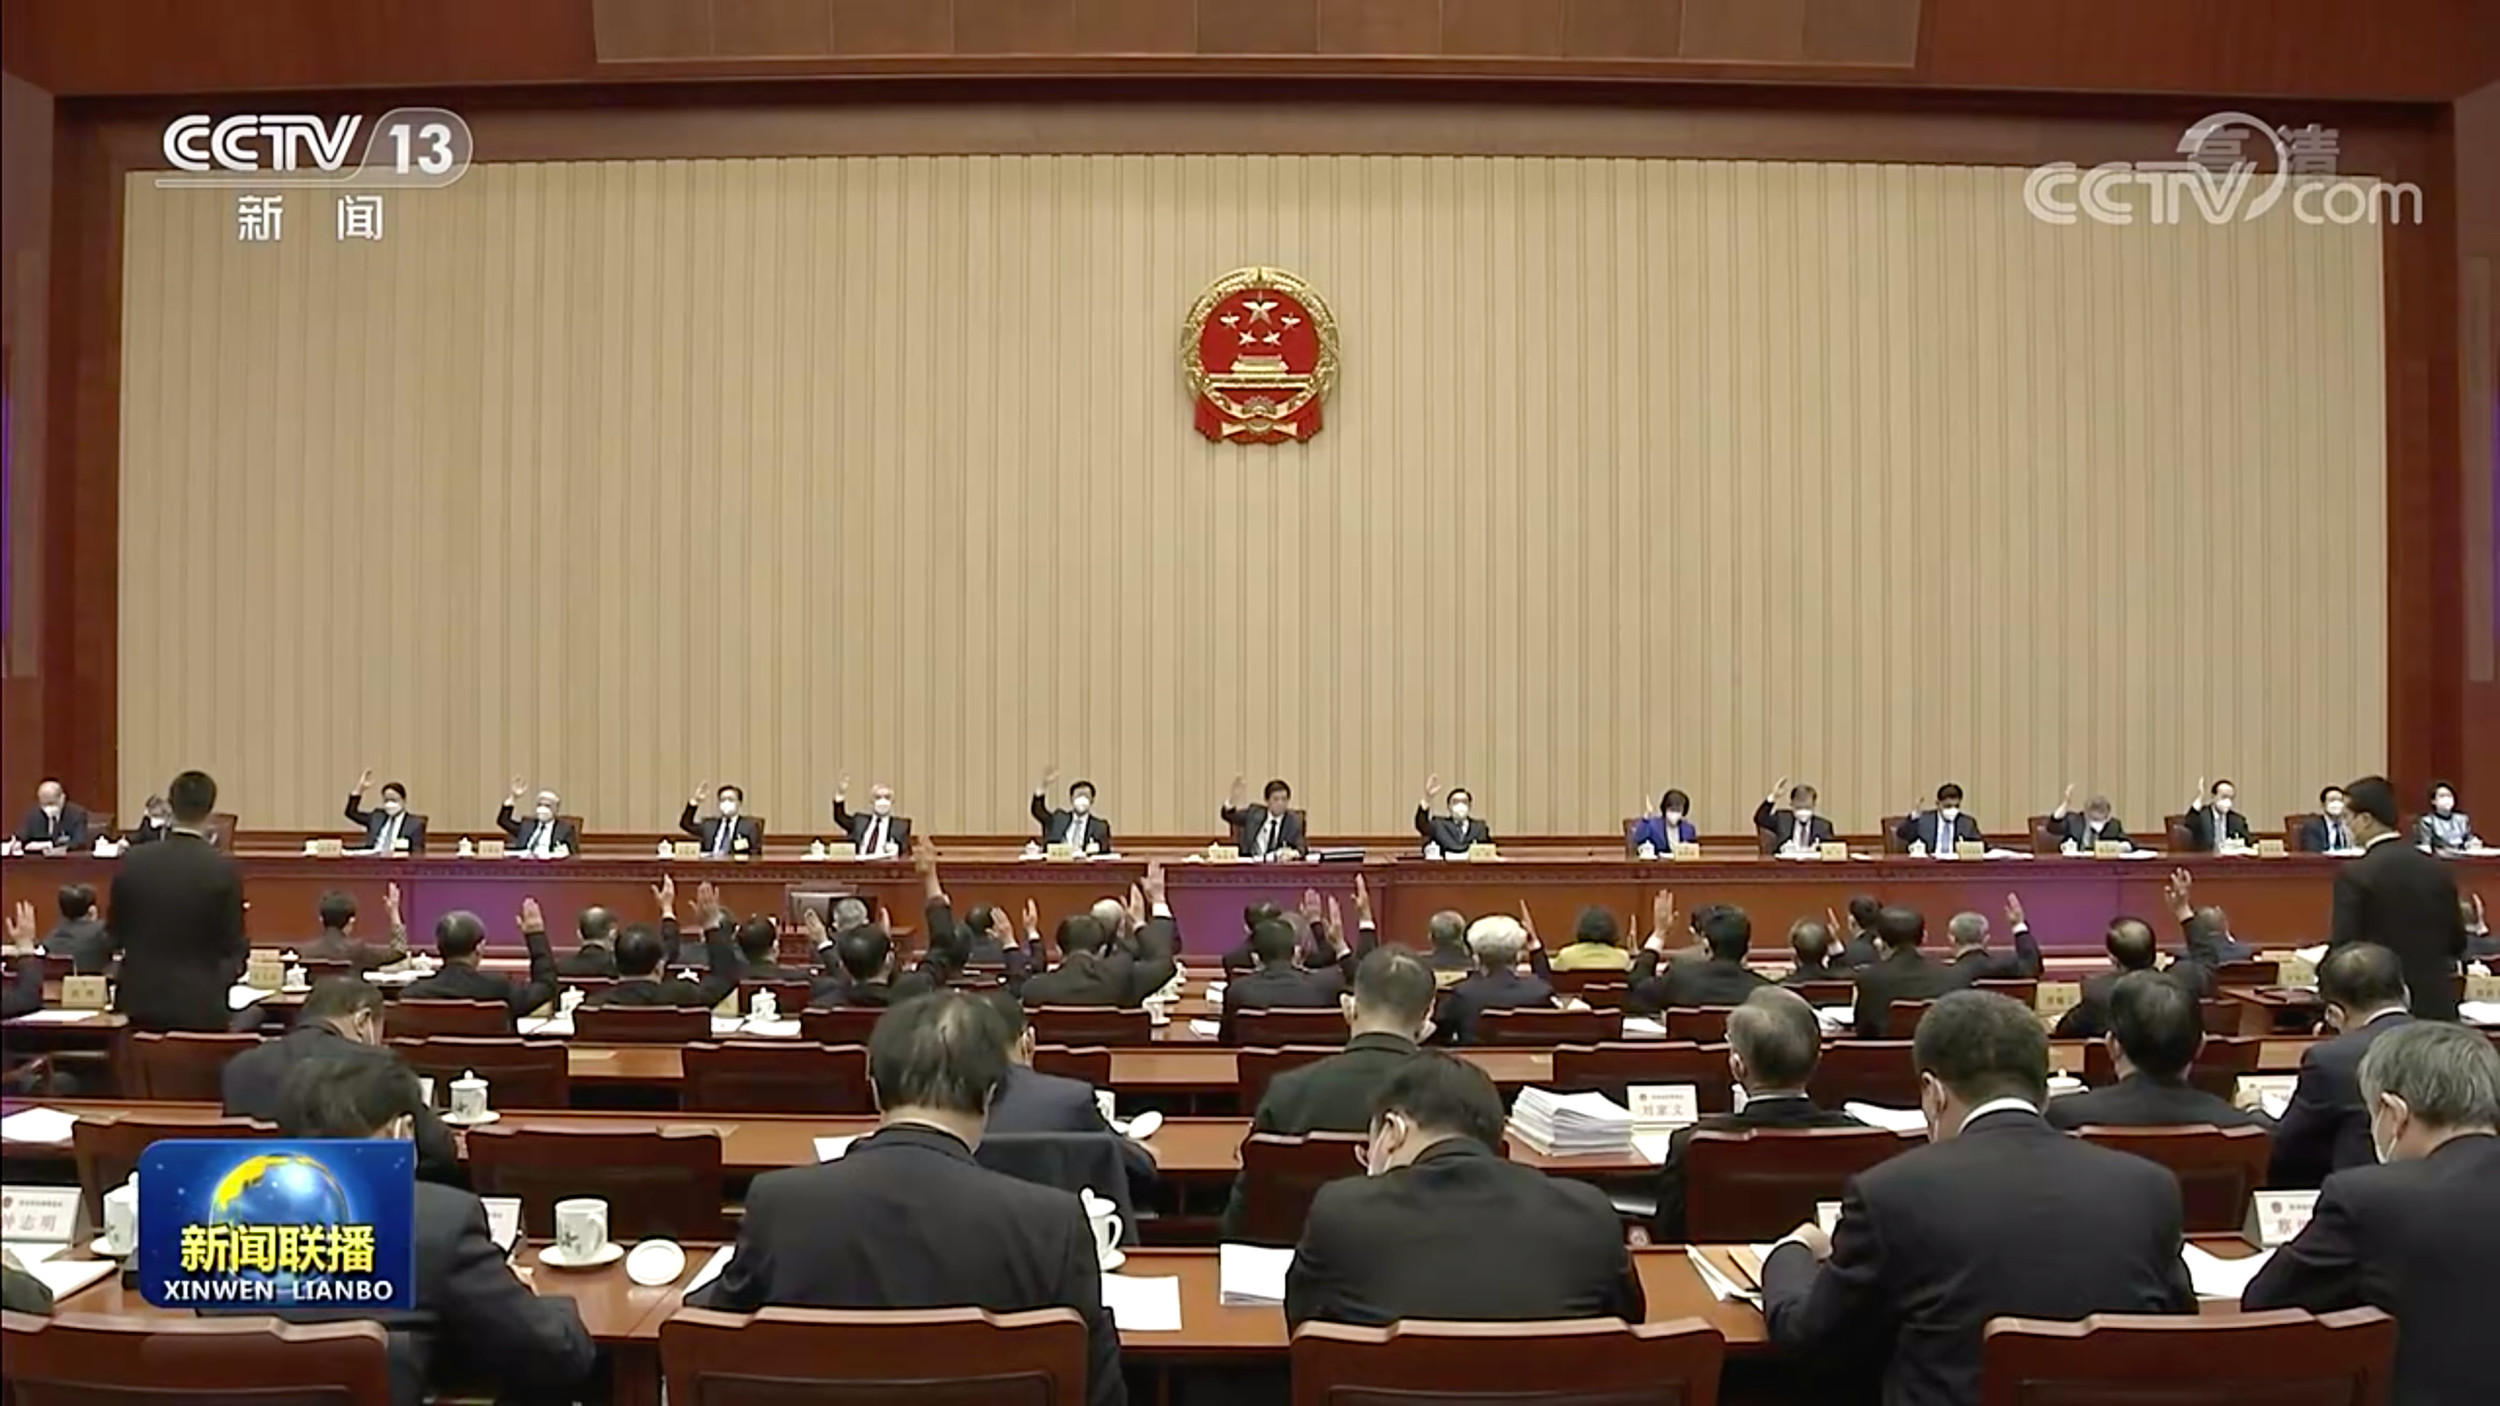 After a four-day meeting, the National People’s Congress (NPC) Standing Committee made the decision on Friday to give clear definitions on the scope of the legislation. Photo: CCTV